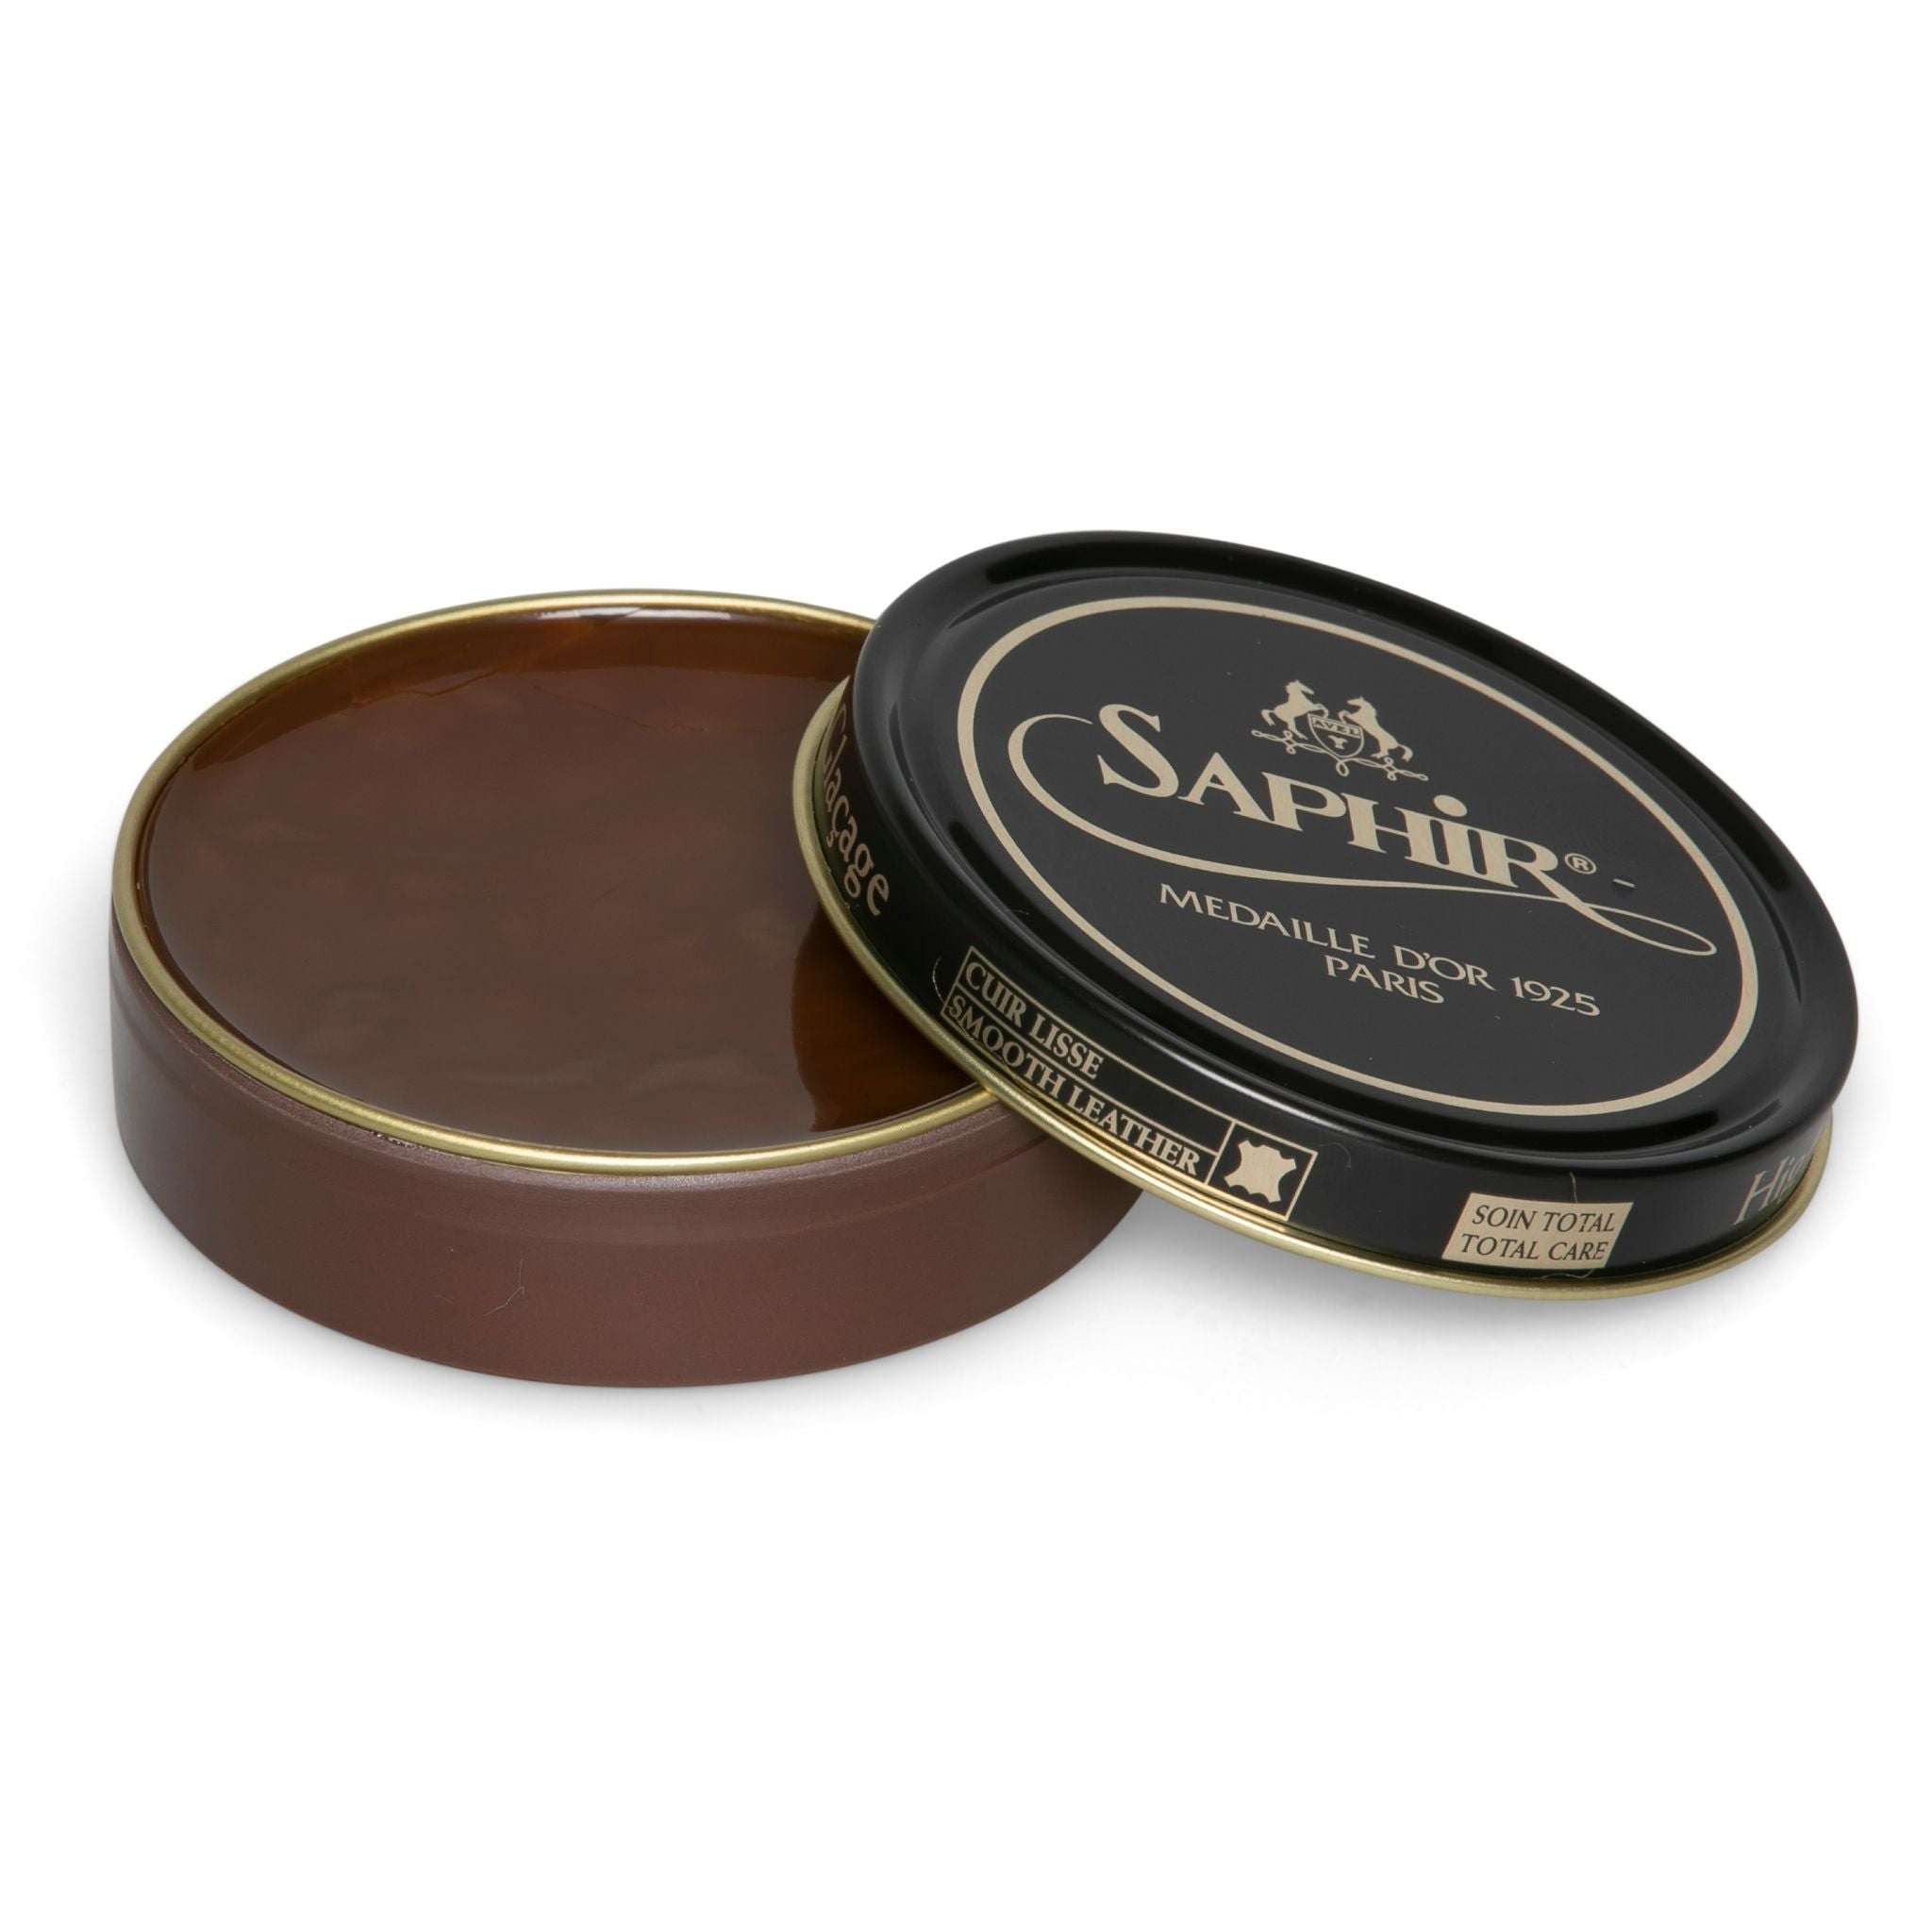 Saphir Pate de Luxe Wax Shoe Polish (100ml) in medium brown colour is the perfect solution to achieve the ultimate shine